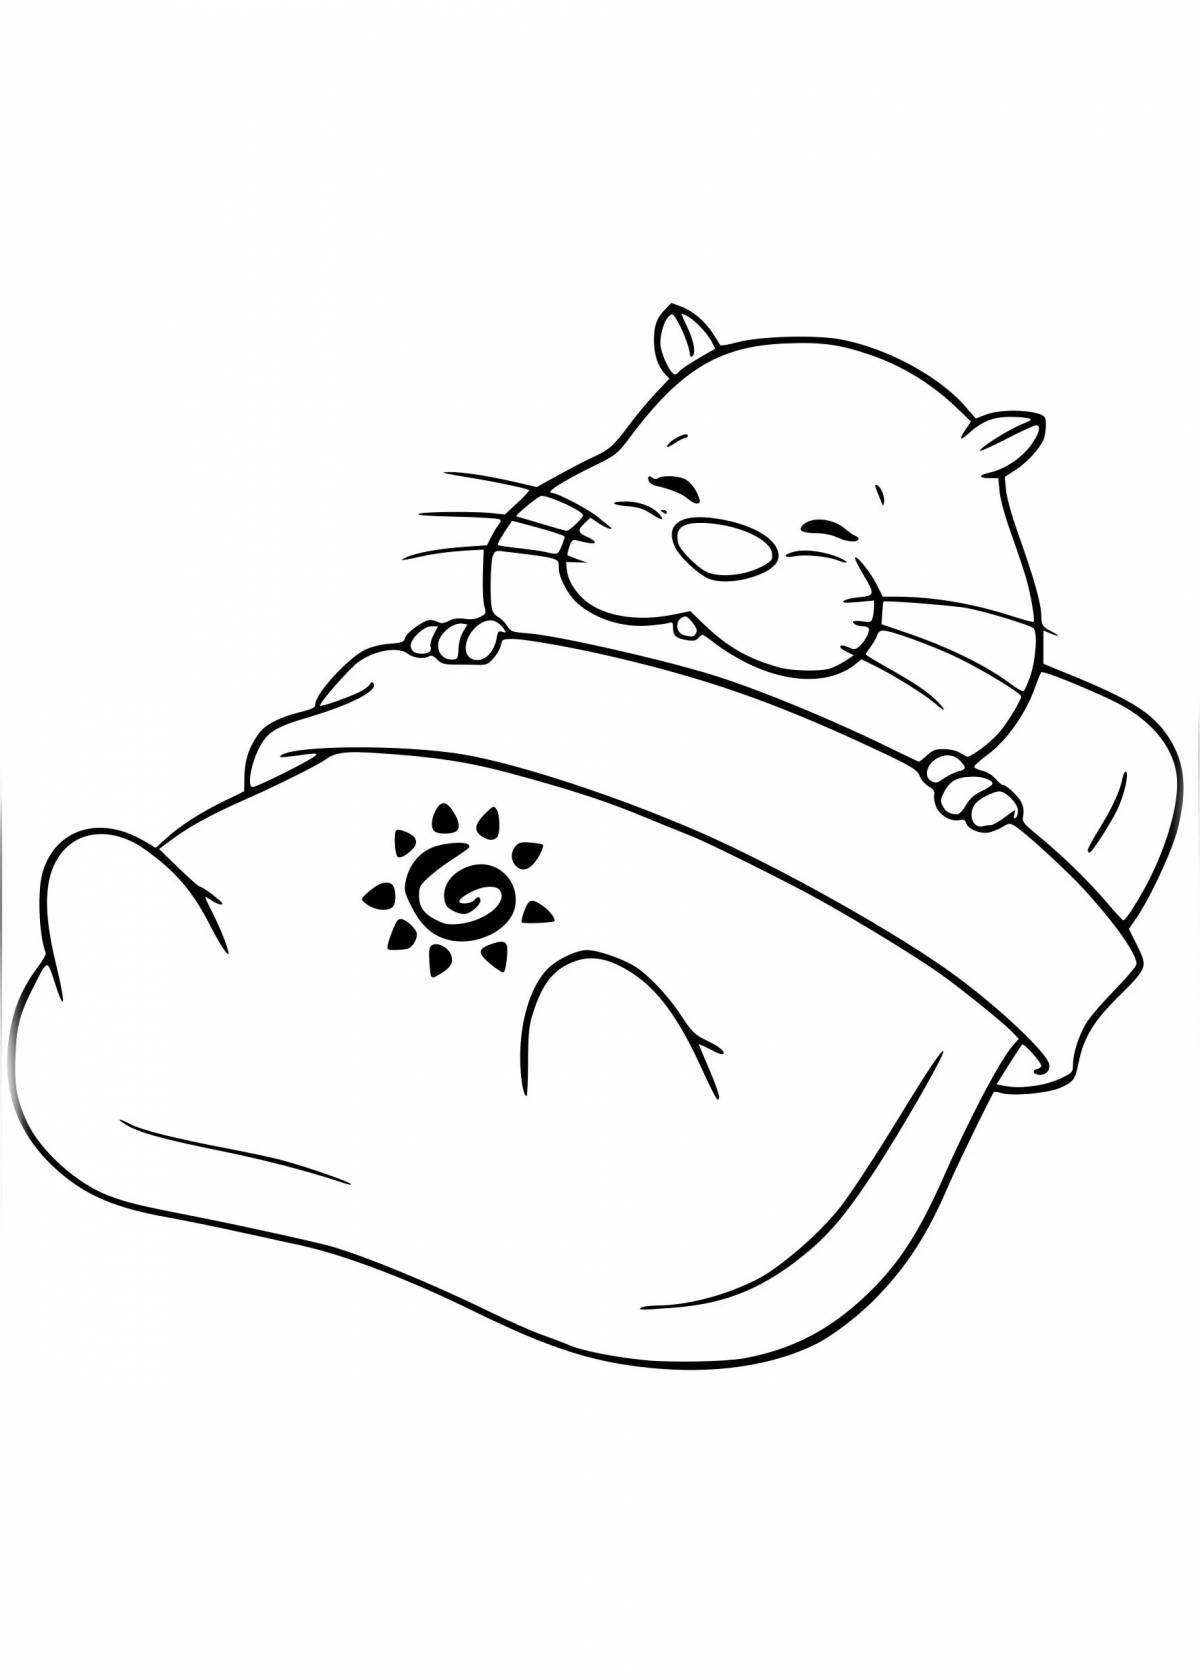 Adorable hamster coloring book for kids